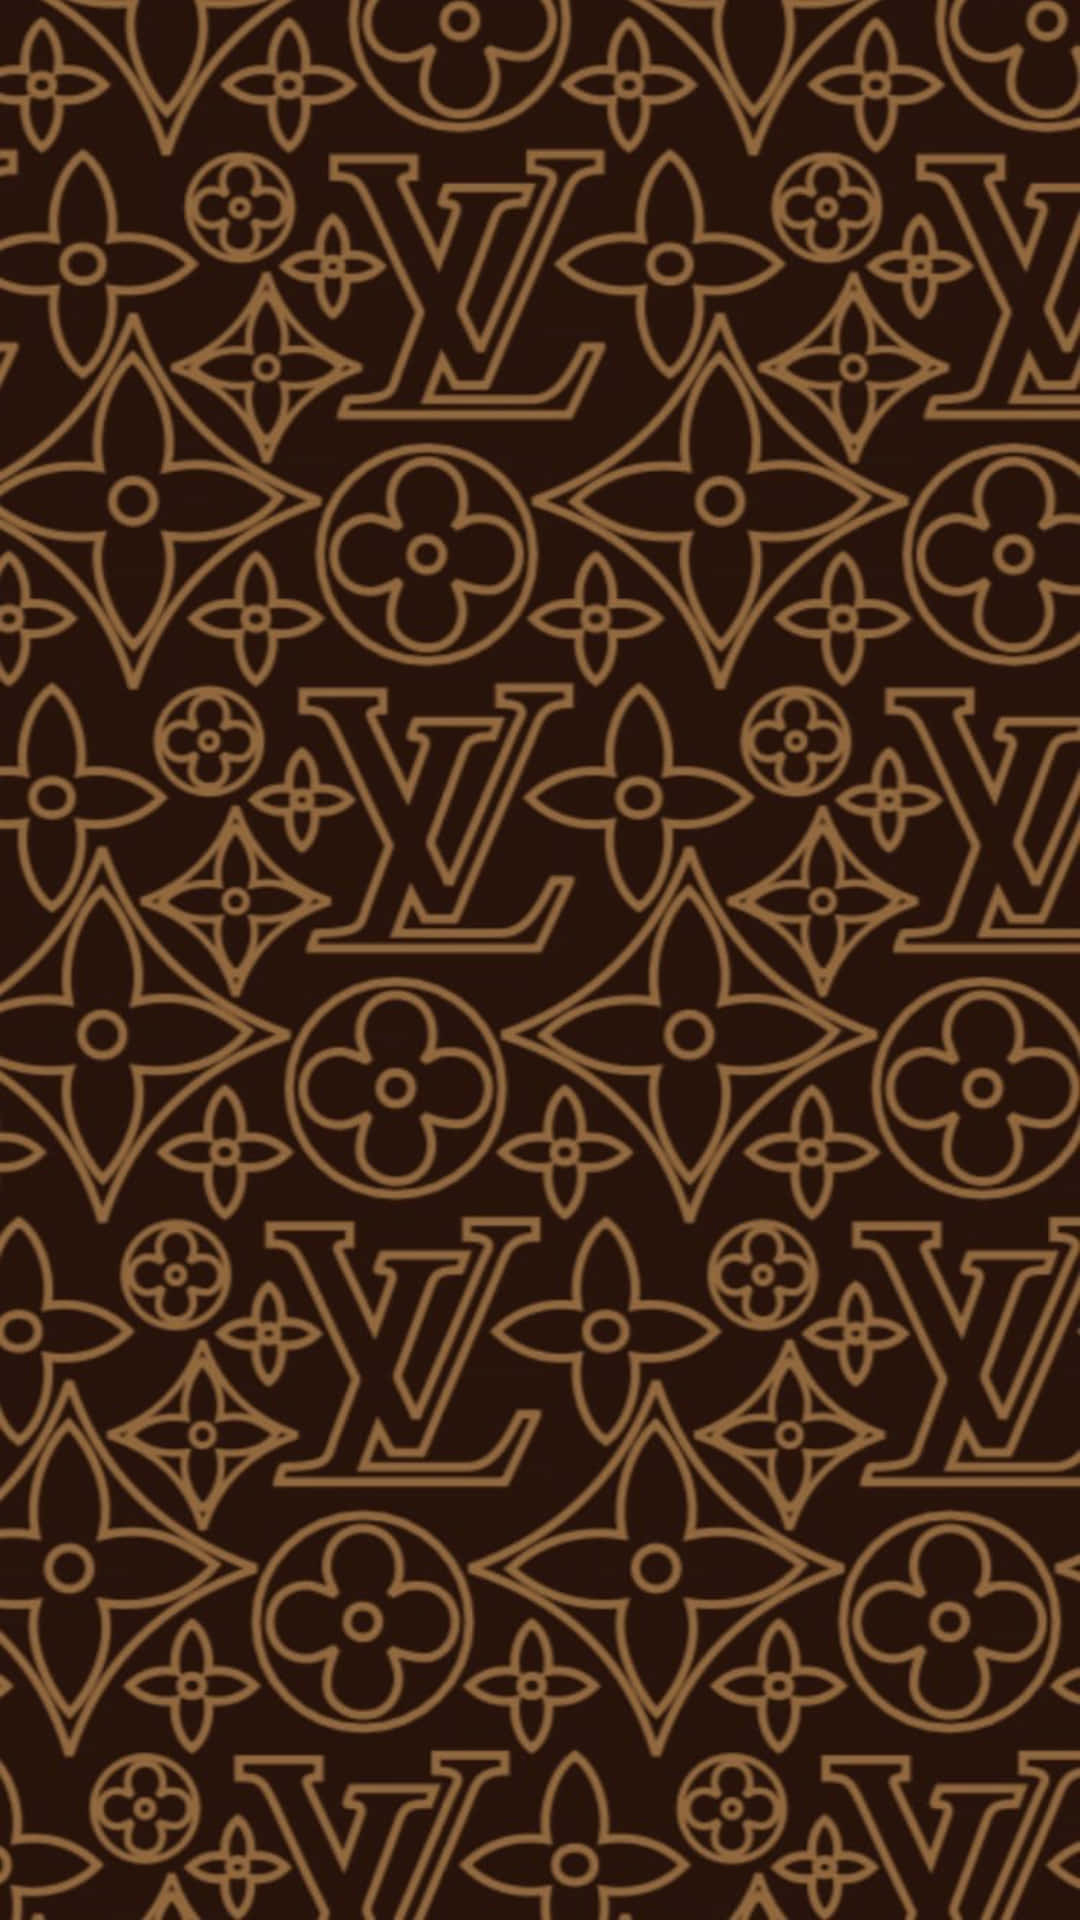 10 Most Popular Louis Vuitton Iphone Wallpaper FULL HD 1080p For